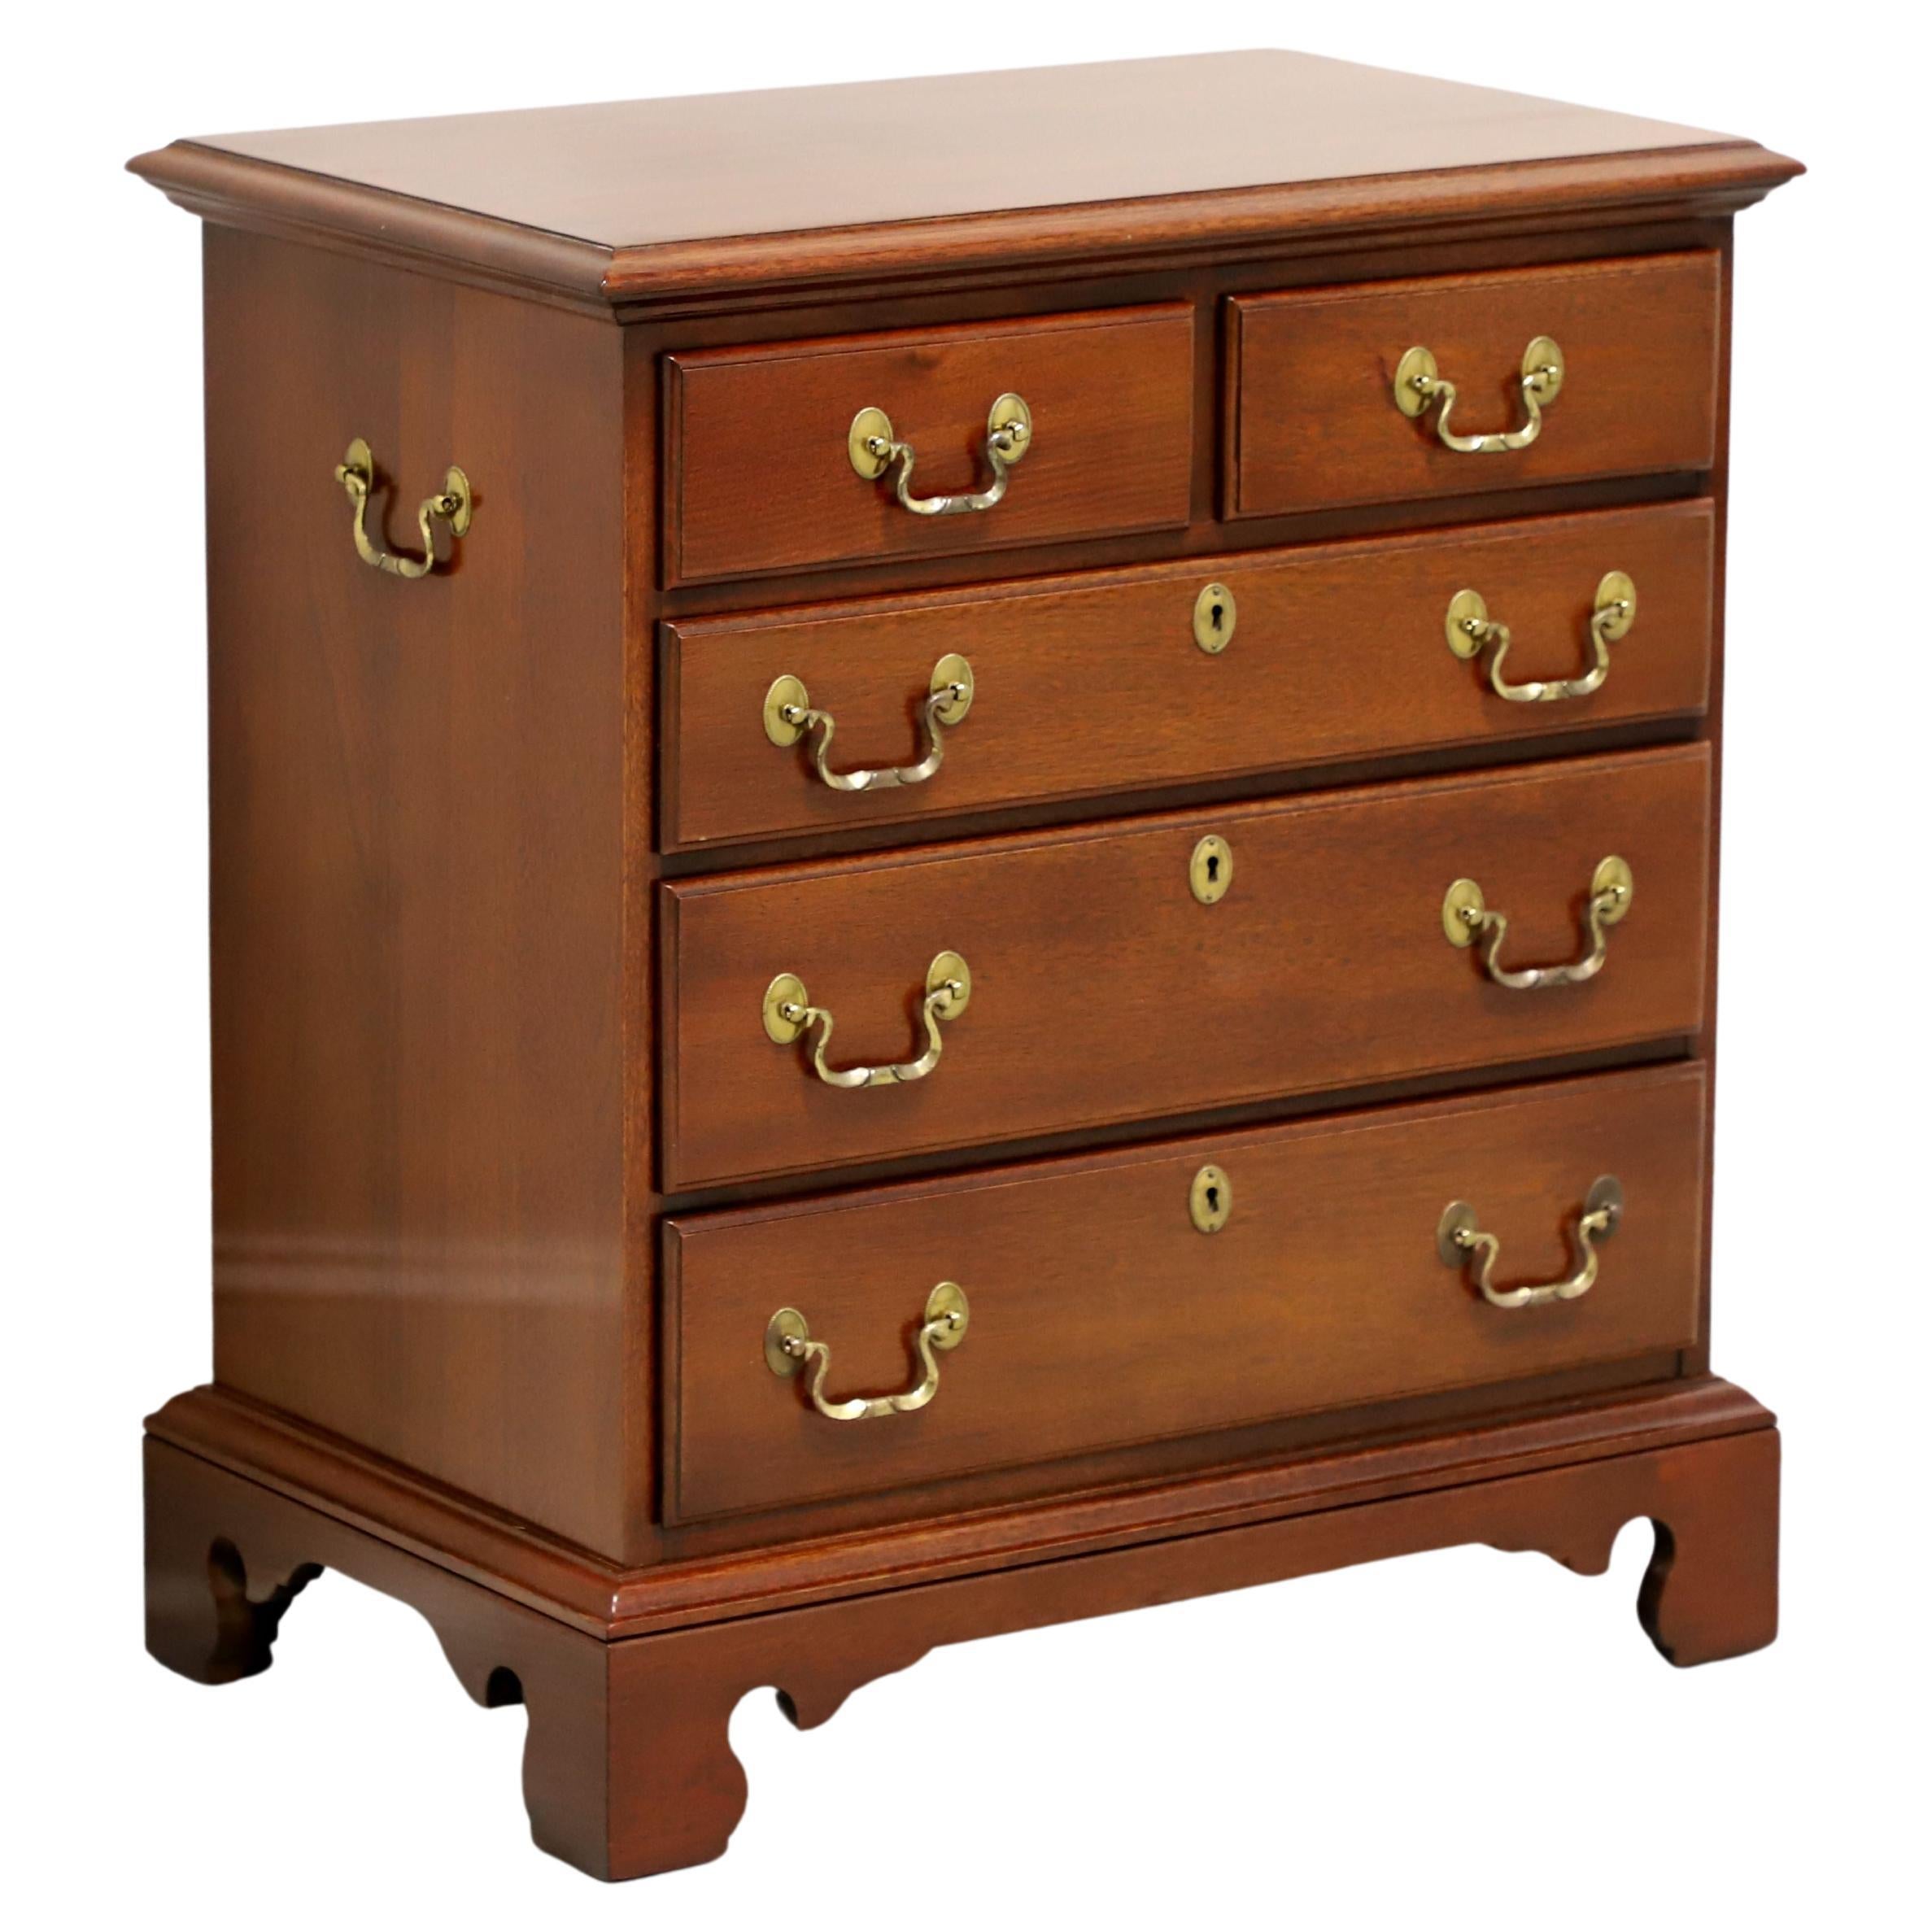 LINK-TAYLOR Heirloom Planters Solid Mahogany Chippendale Bedside Chest - C